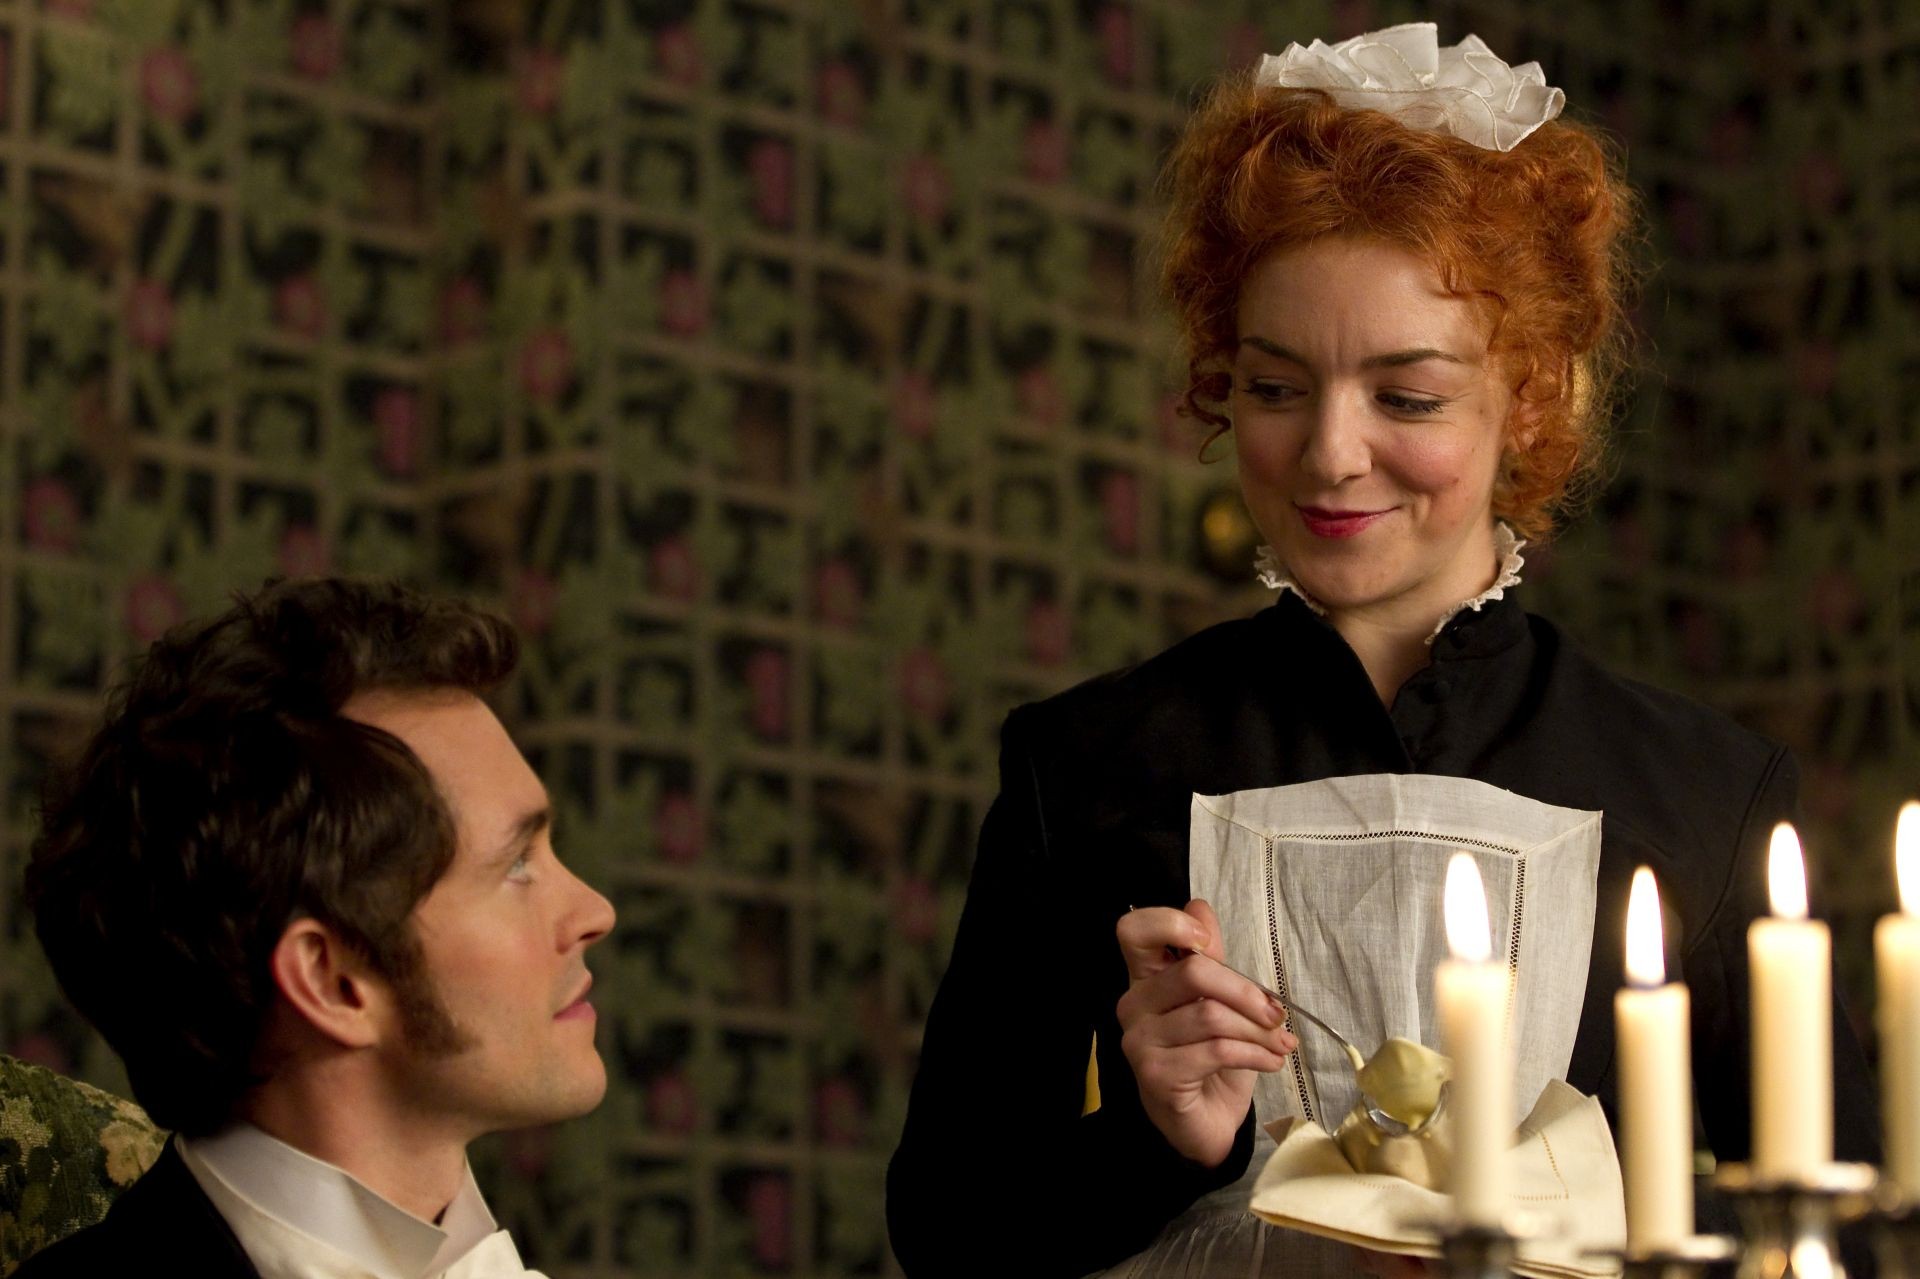 Hugh Dancy stars as Dr. Mortimer Granville and 	Sheridan Smith stars as Molly the Lolly in Sony Pictures Classics' Hysteria (2012). Photo credit by Ricardo Vaz Palma.